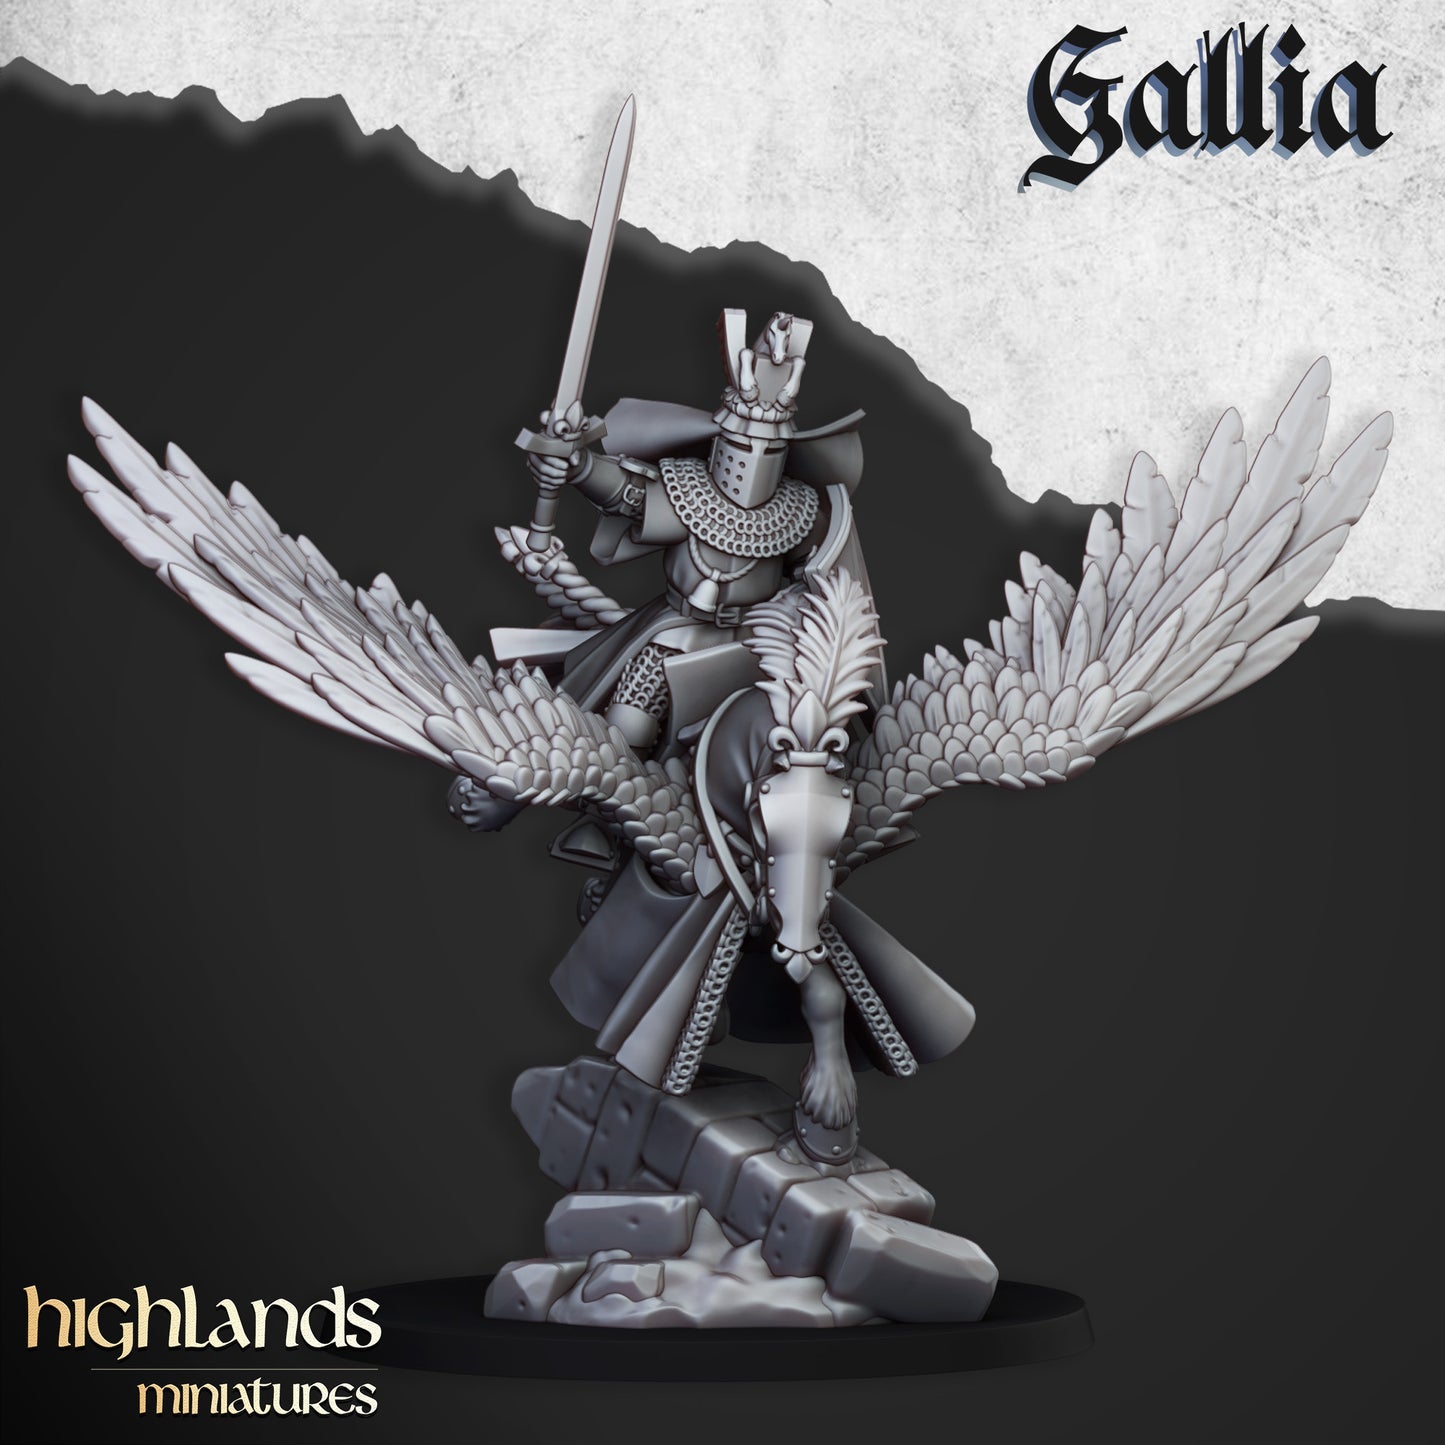 Gallia Knights on Pegasus by Highlands Miniatures.